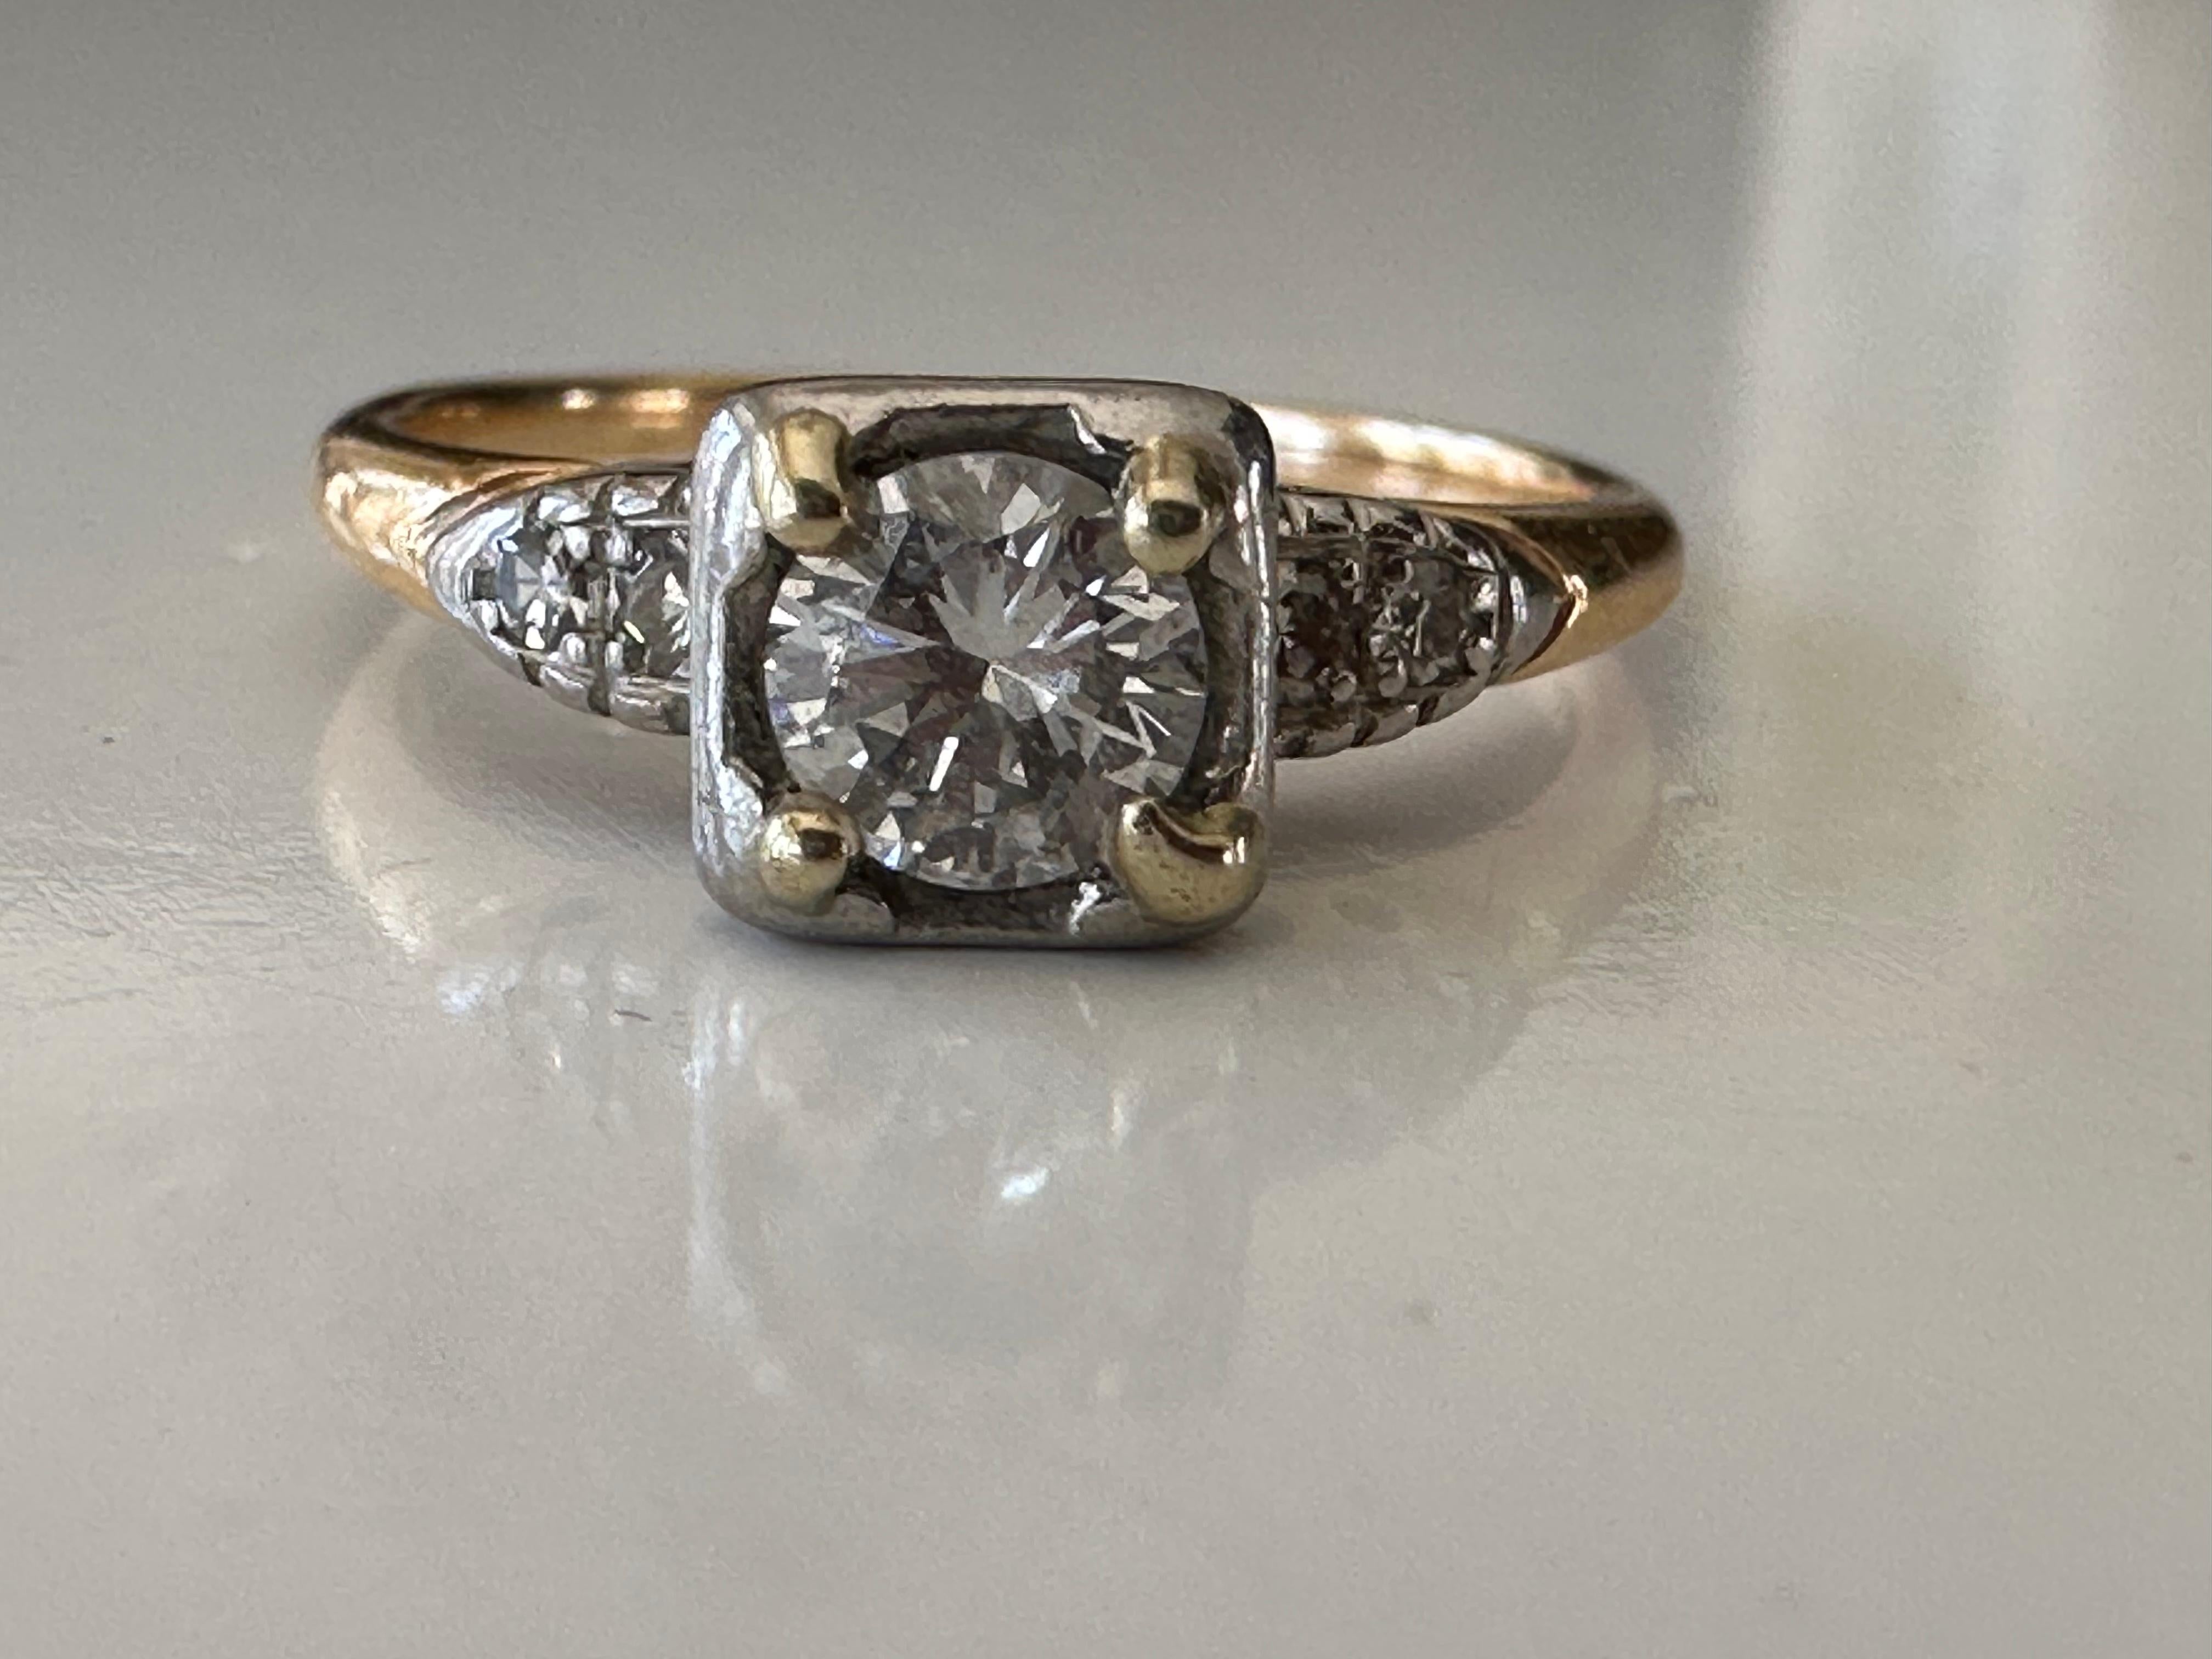 Crafted in the 1940s in 14k yellow and white gold, this stunning two-tone ring is designed around an Old European cut center stone measuring approximately 0.40 carats, F color, VS clarity and accented with four single cut diamonds. 